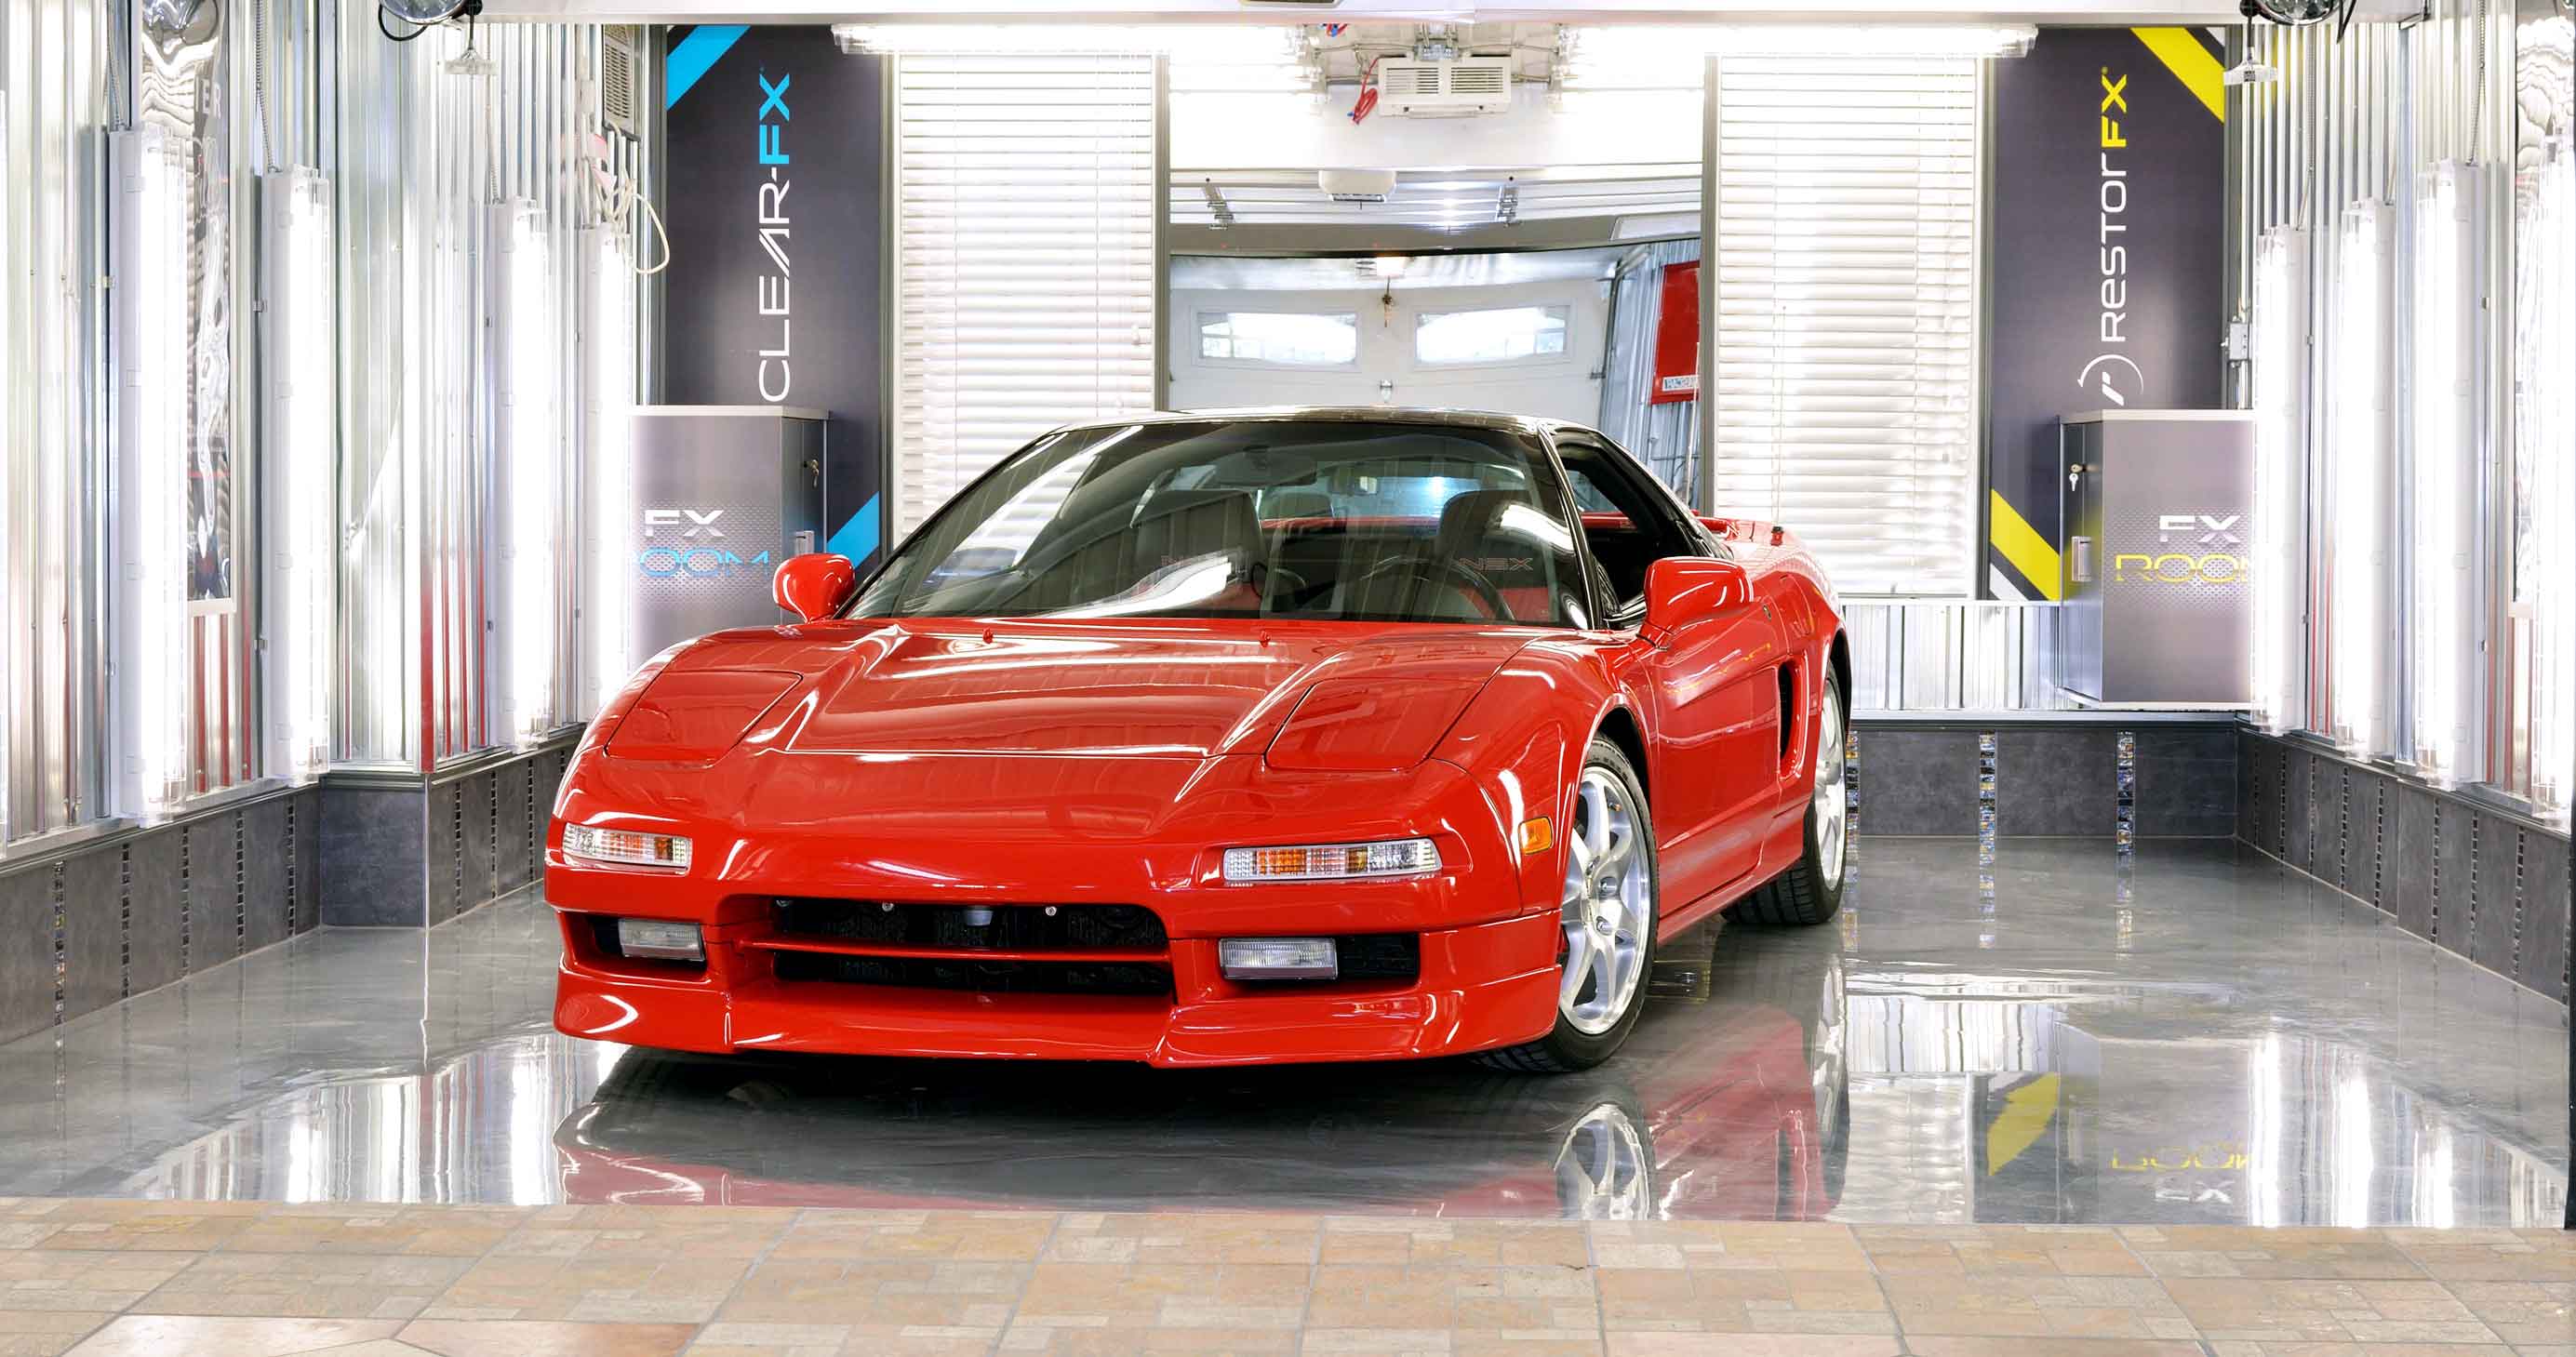 Shiny red Ferrari in brightly lit shop area at RestorFX Quebec with branded signage in the back